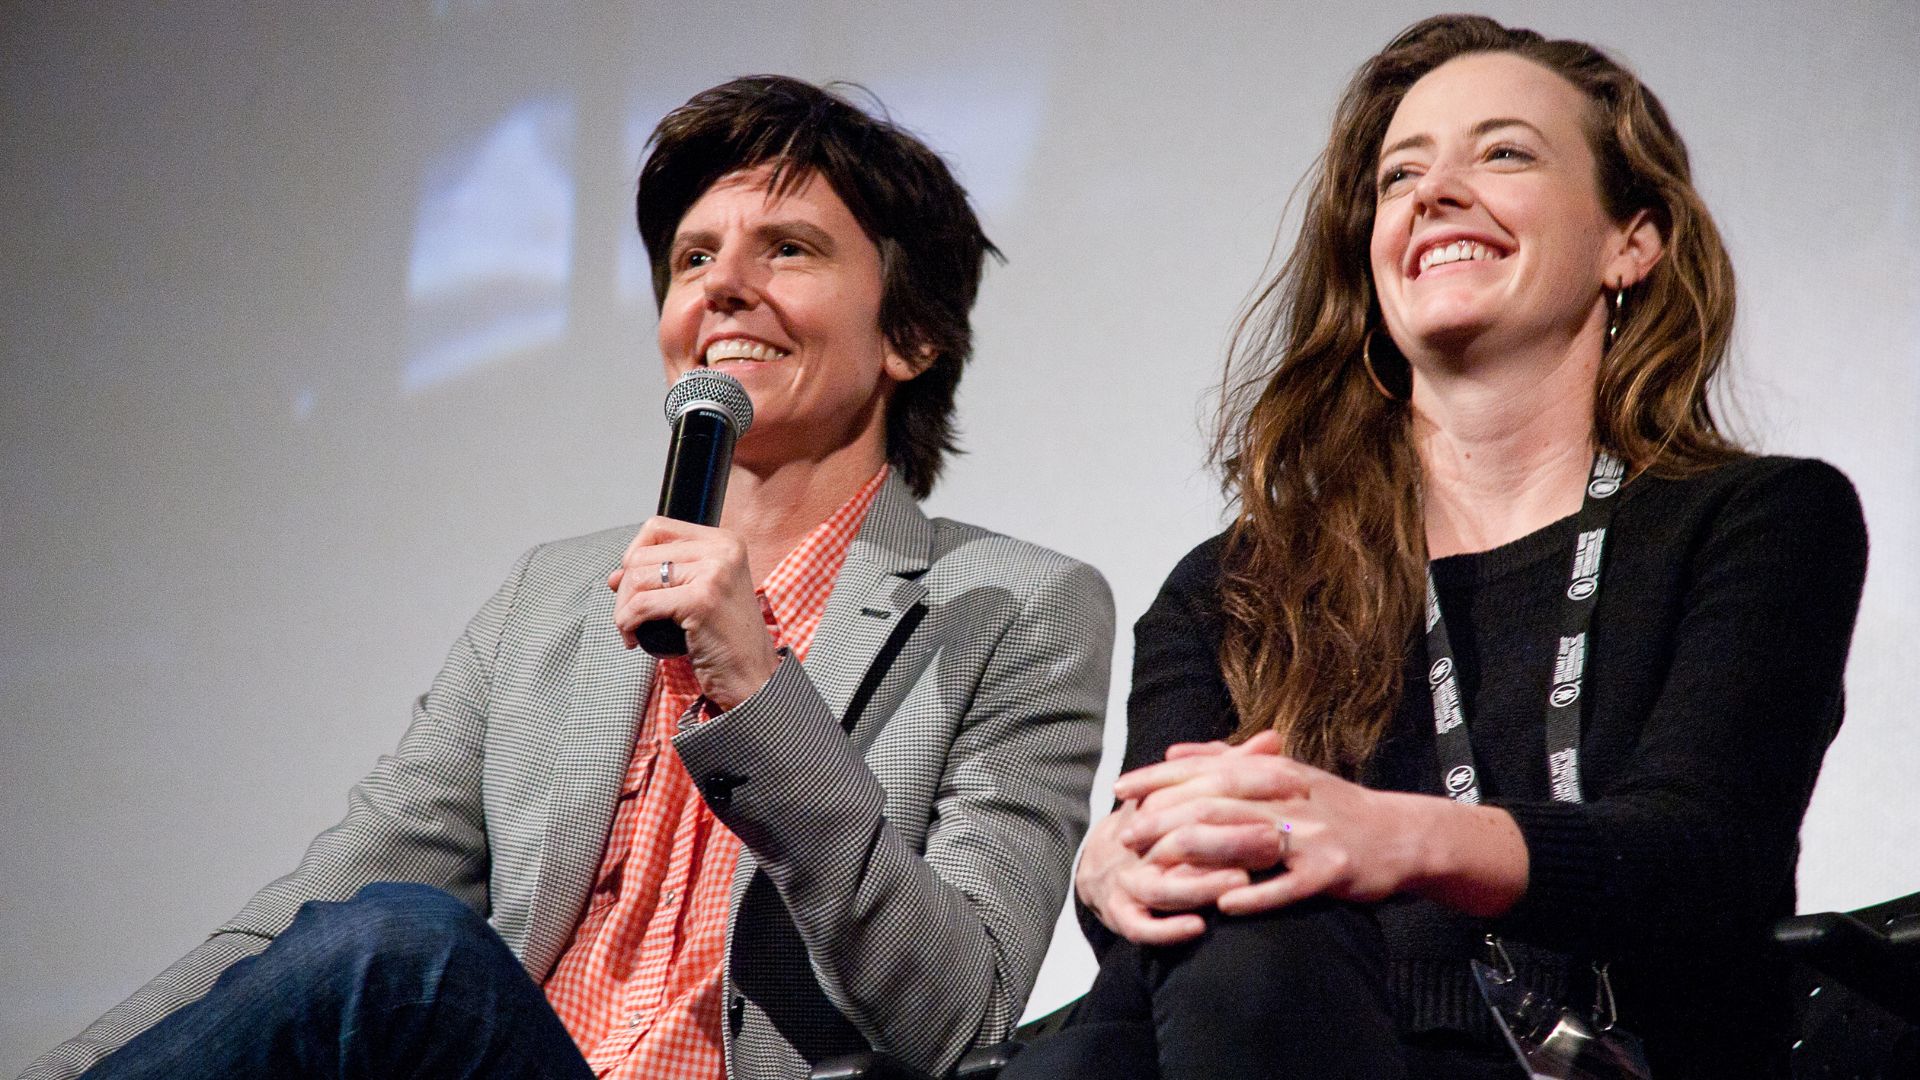 Tig Notaro holding a microphone during a Q and A session.